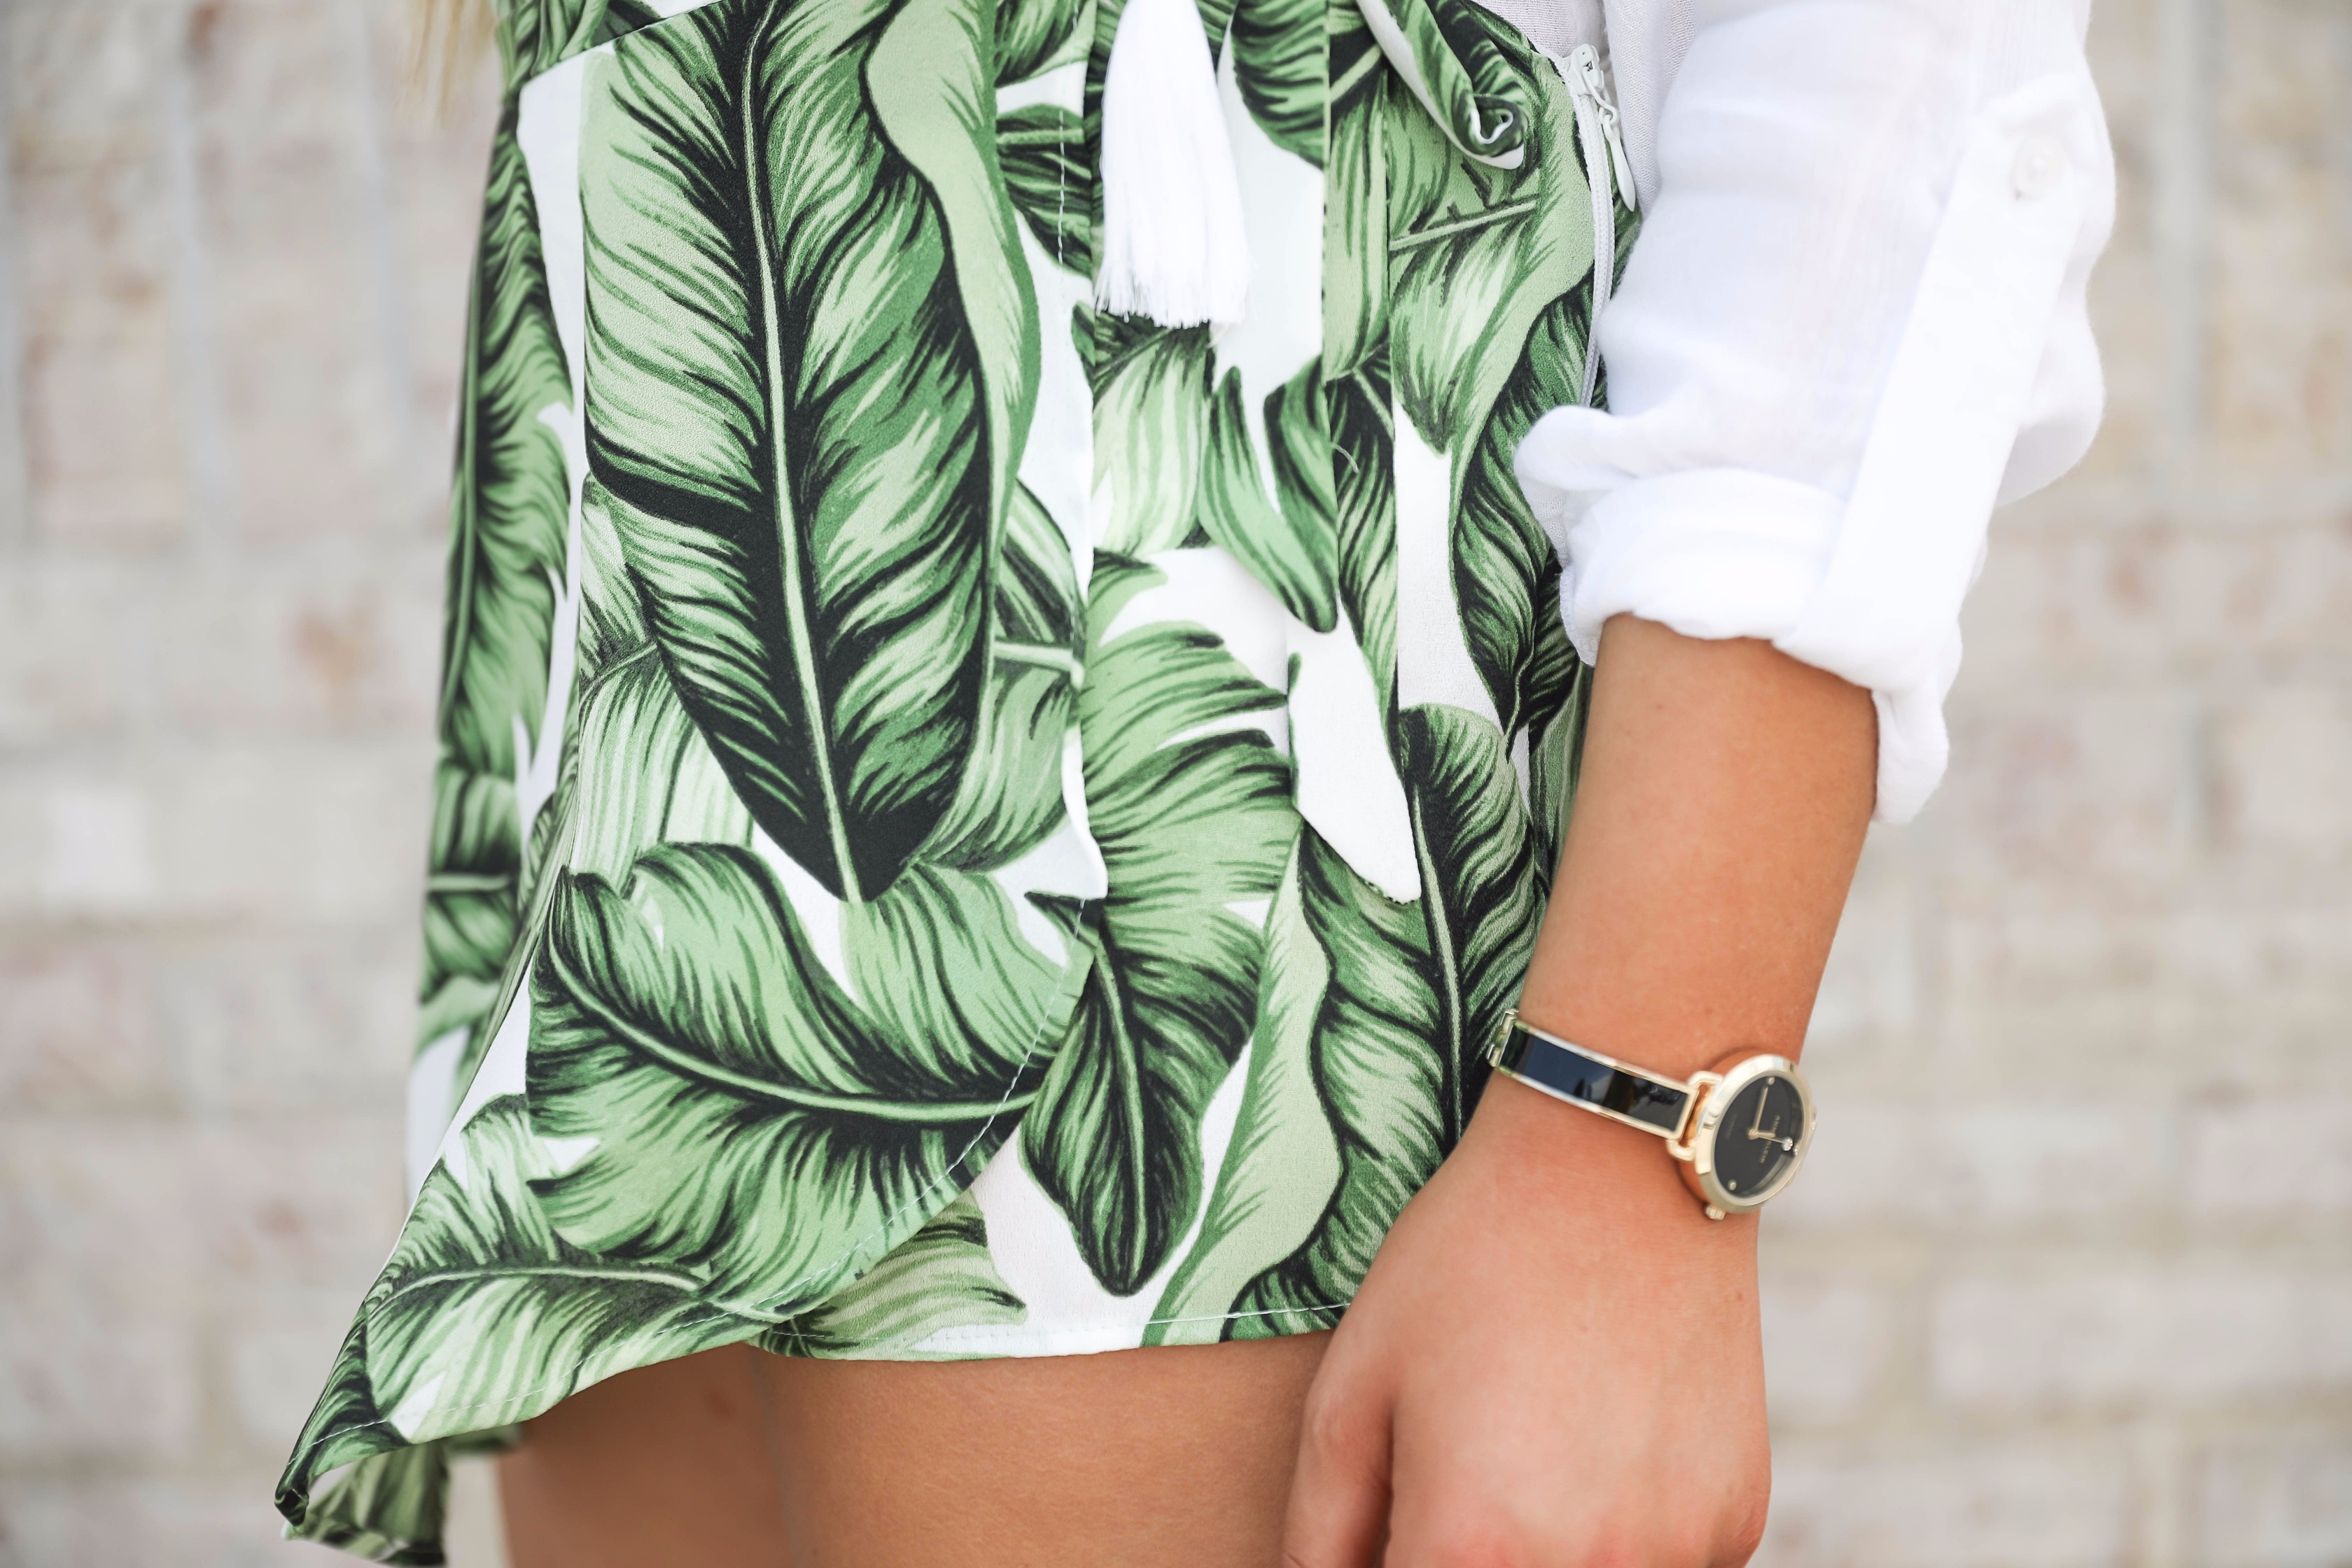 Palm leaf skort y show me your mumu with flowy a white tassel top perfect outfit for summer days! on fashoin blog daily dose of charm by lauren lindmark